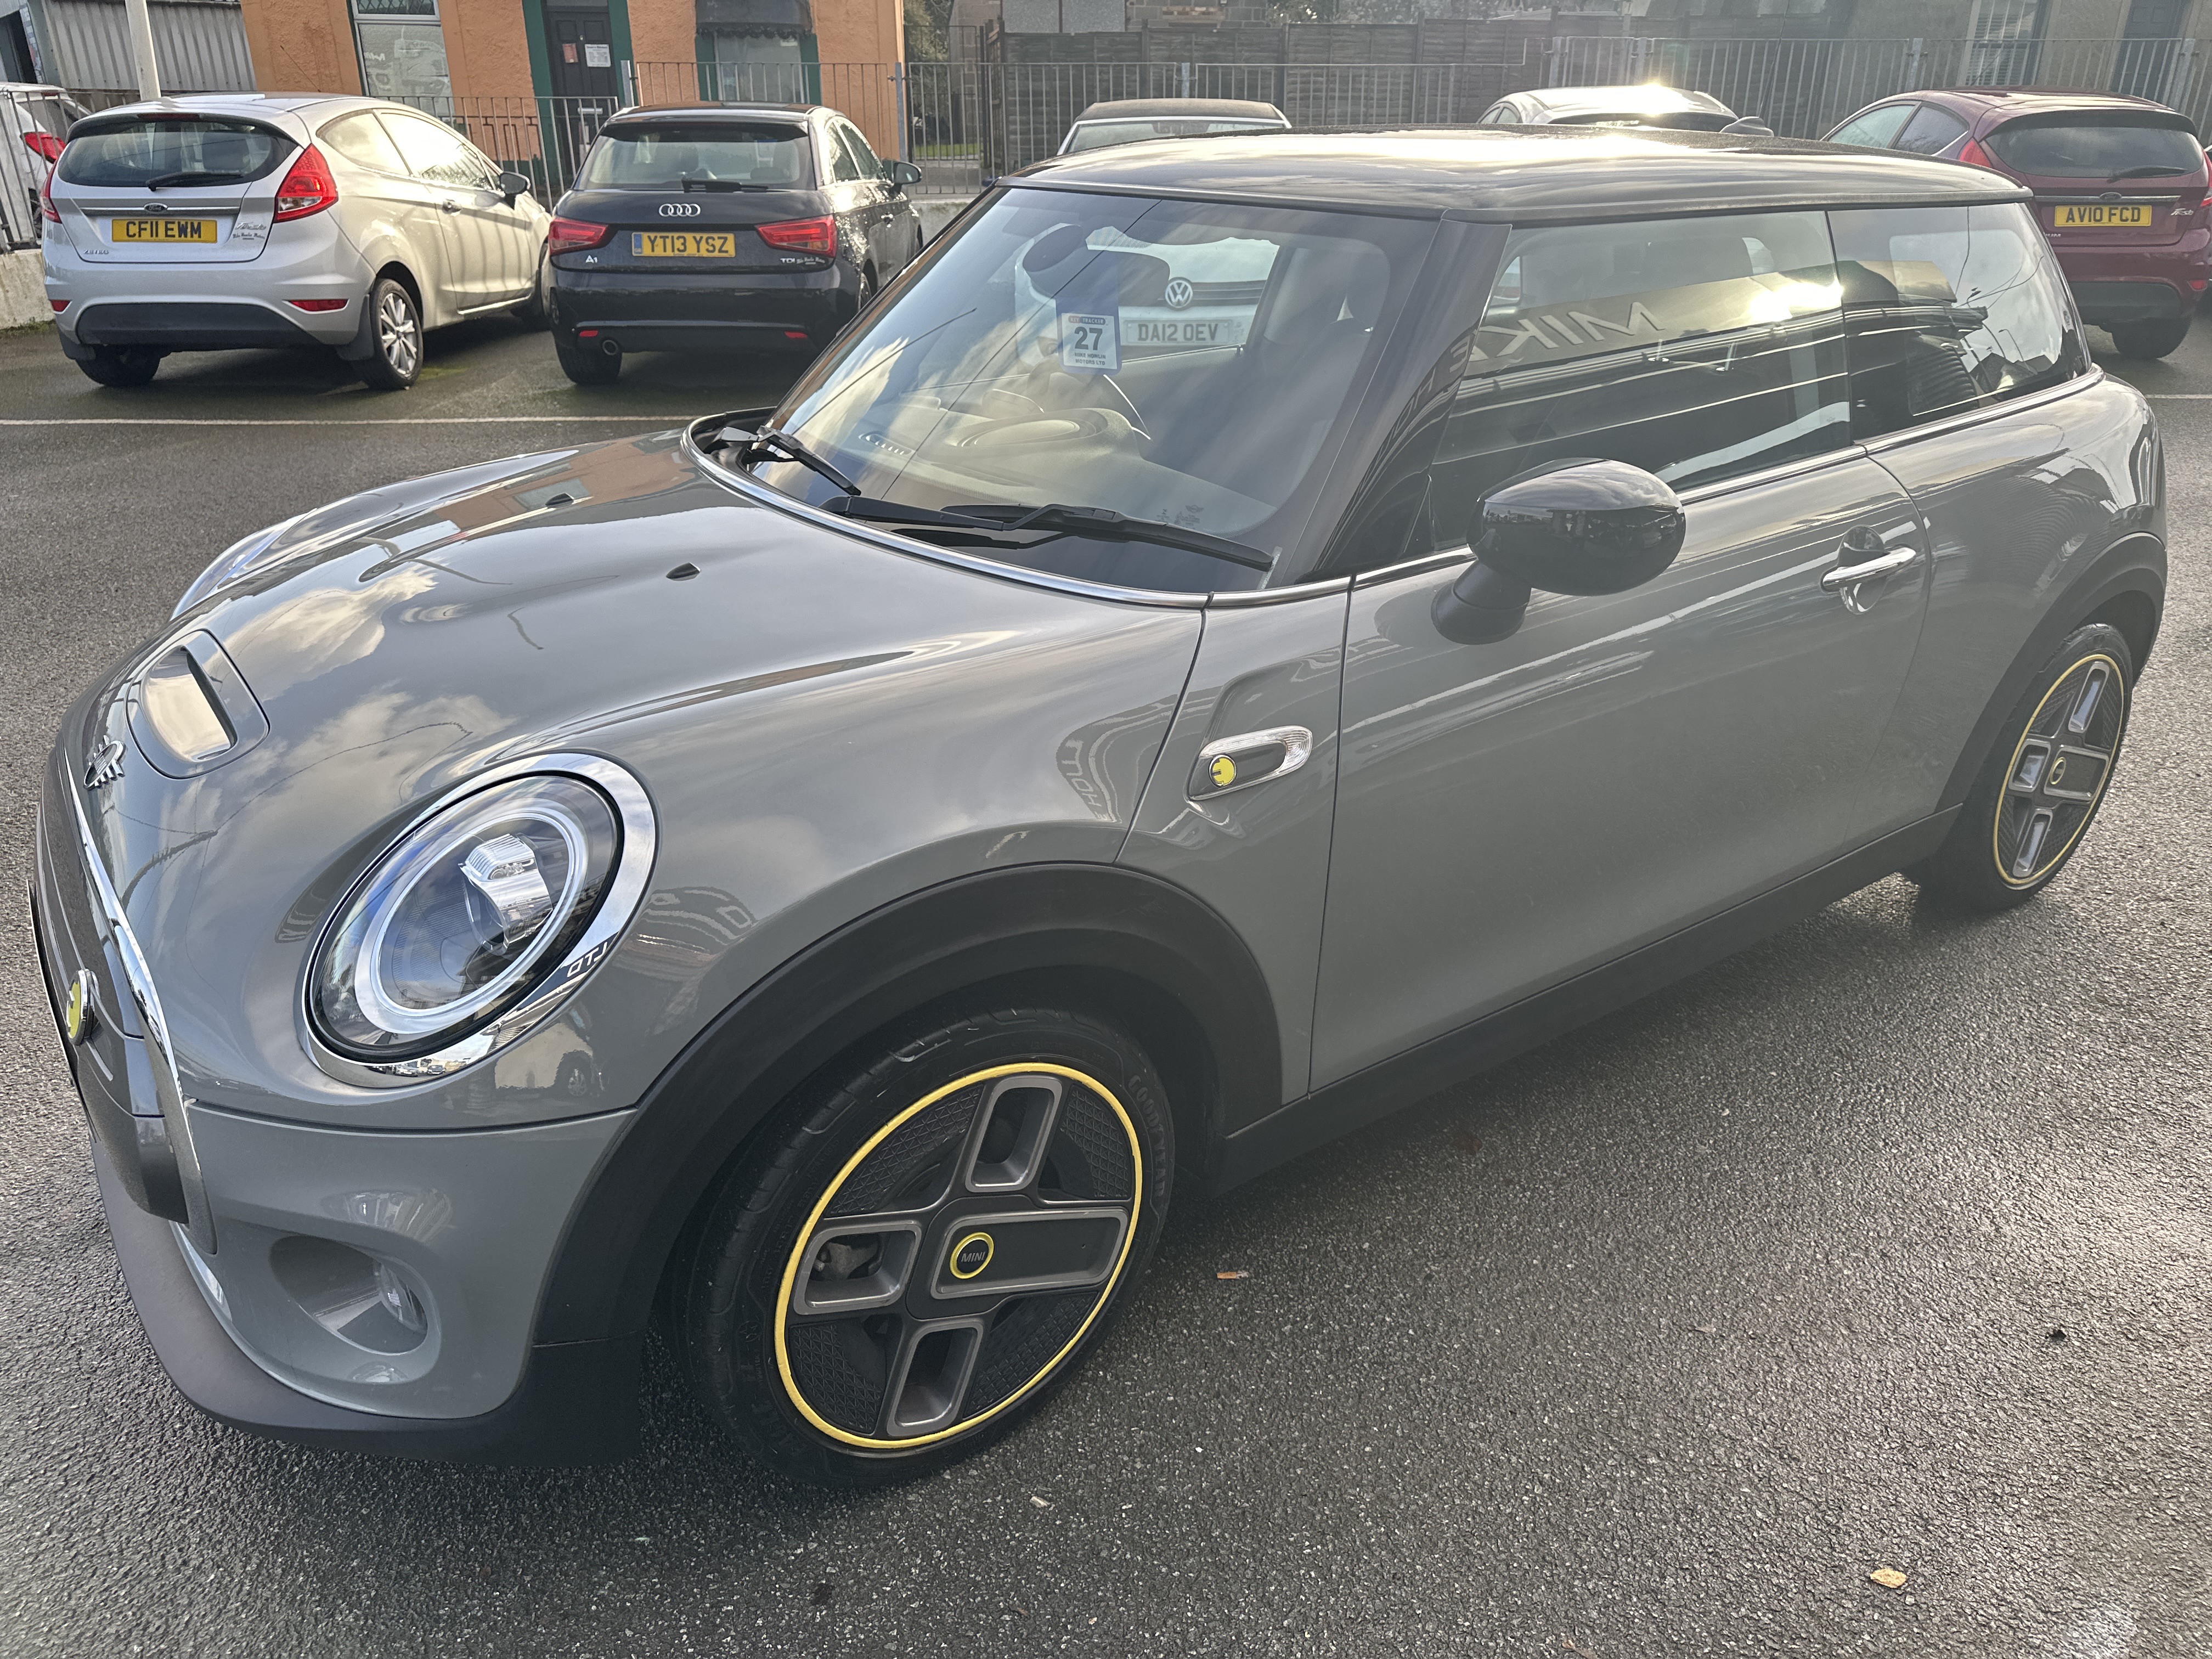 Mini COOPER S ELECTRIC LEVEL 1  for sale at Mike Howlin Motor Sales Pembrokeshire